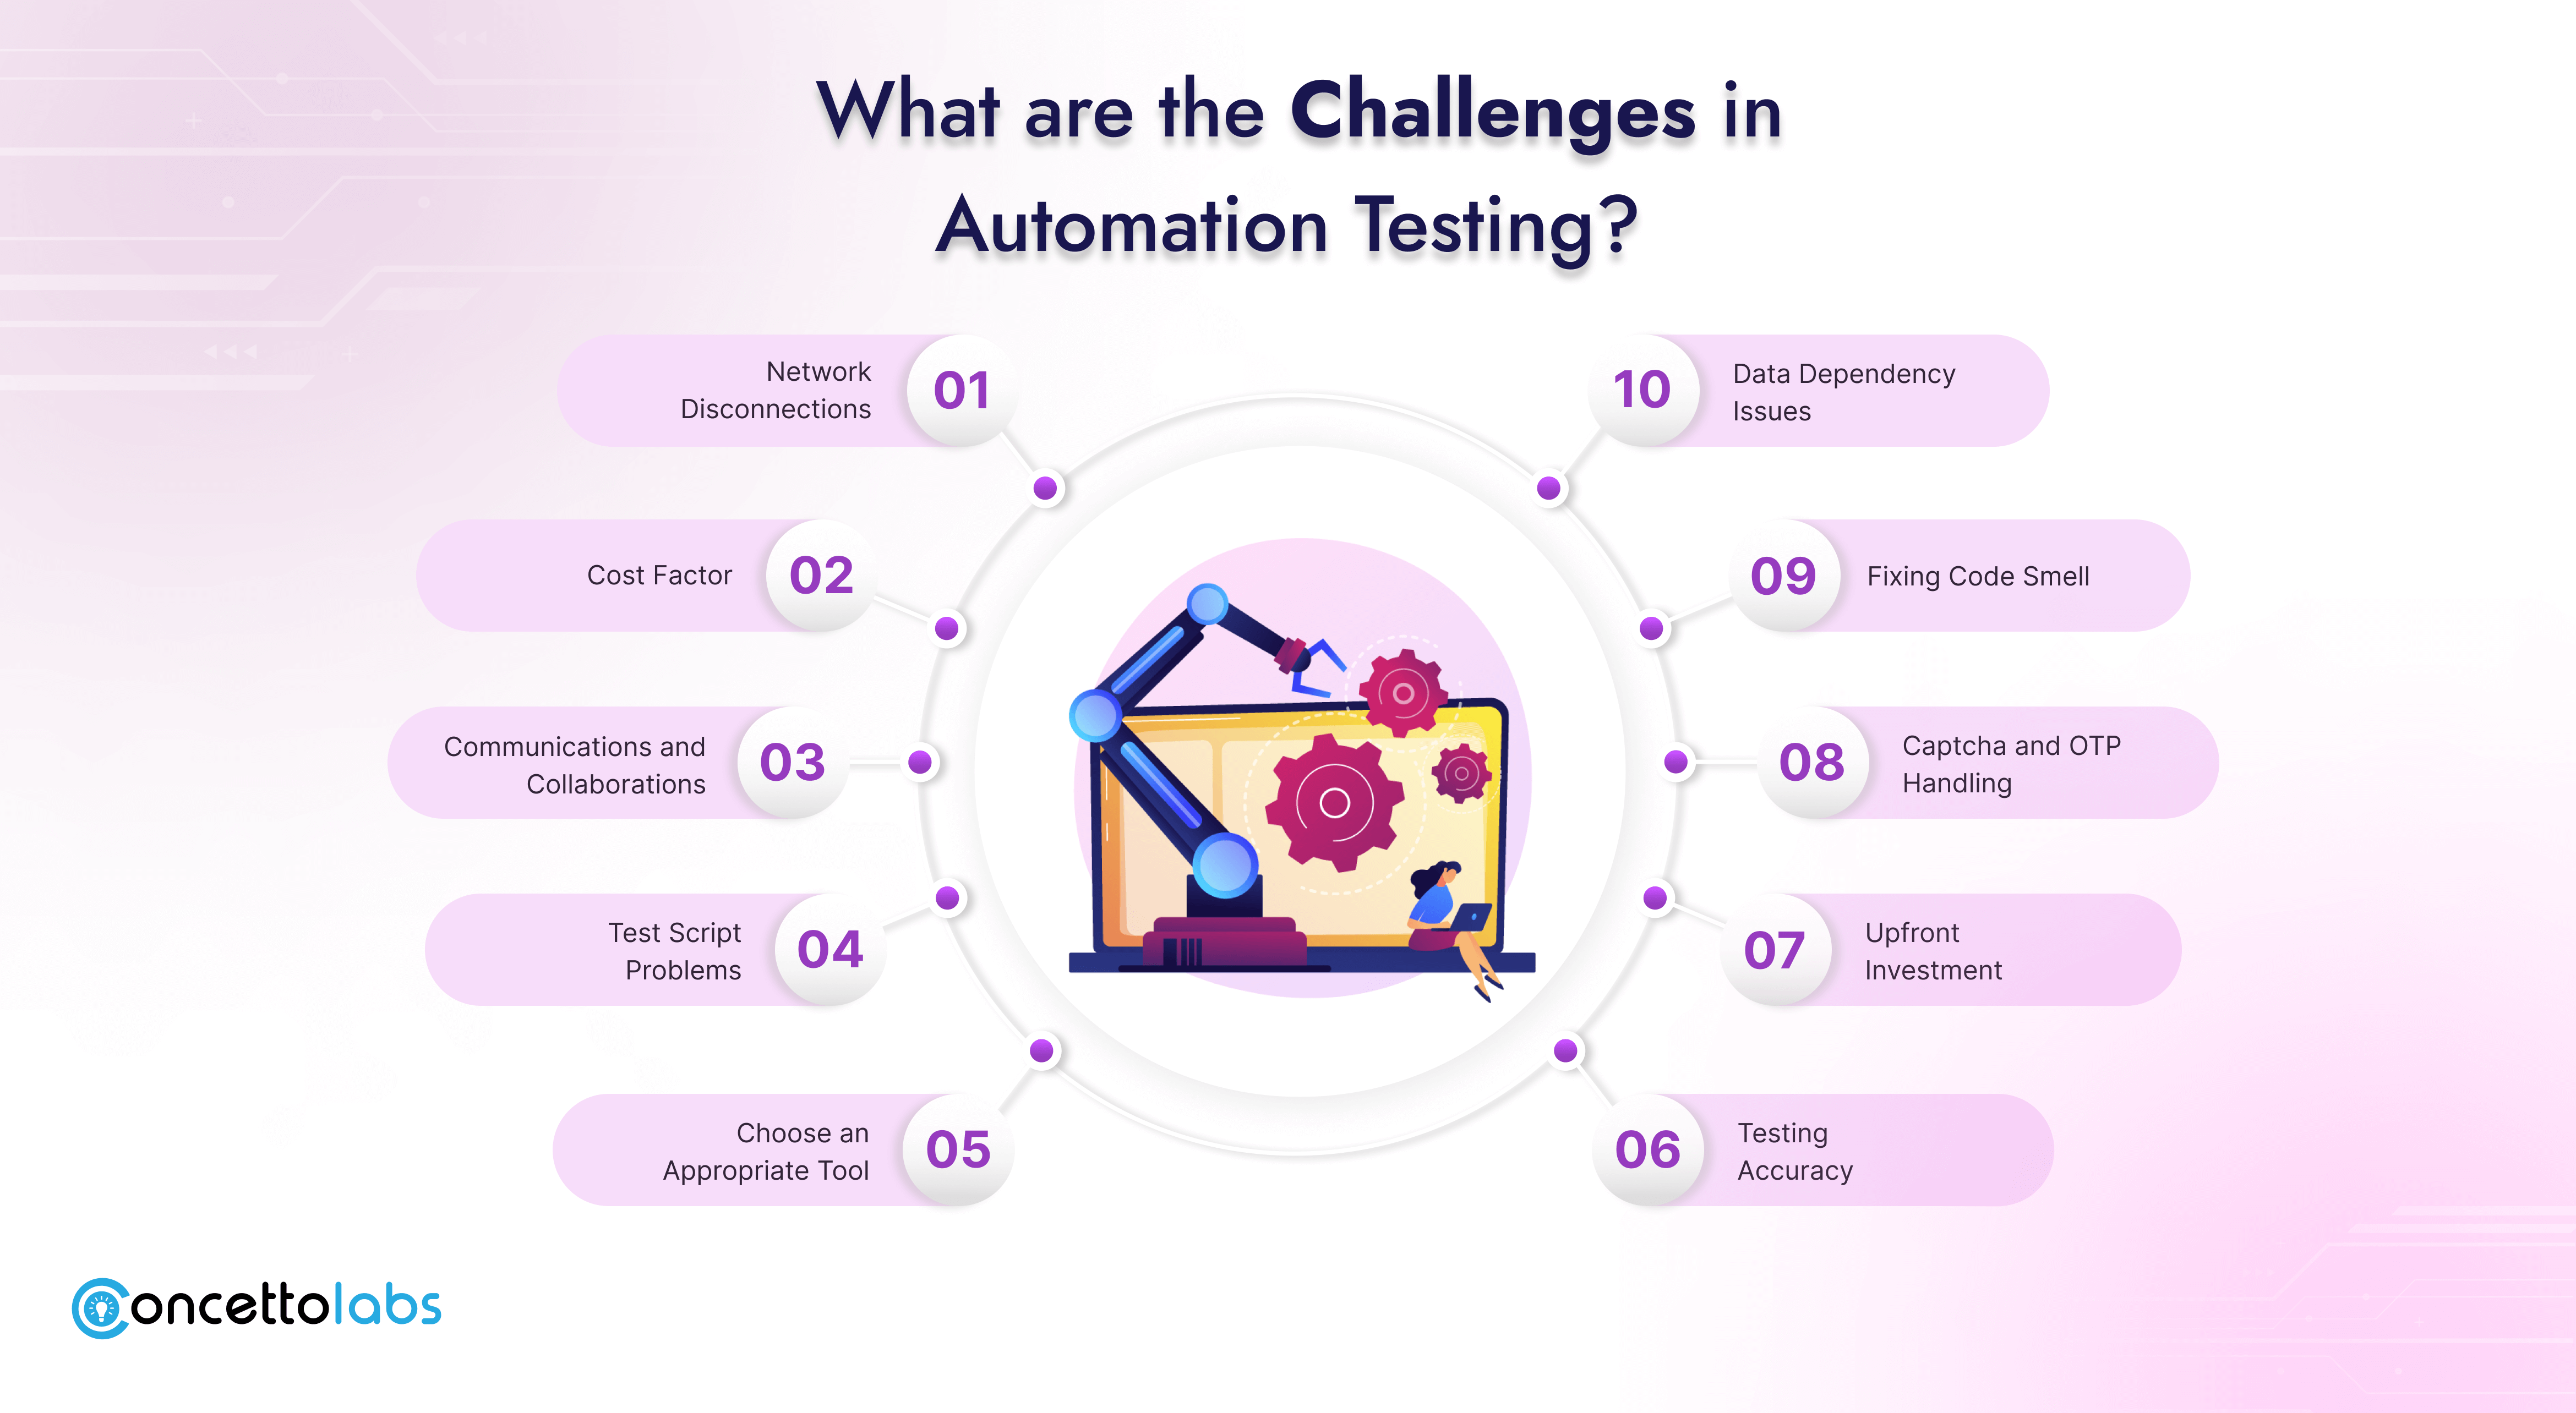 What are the Challenges in Automation Testing?